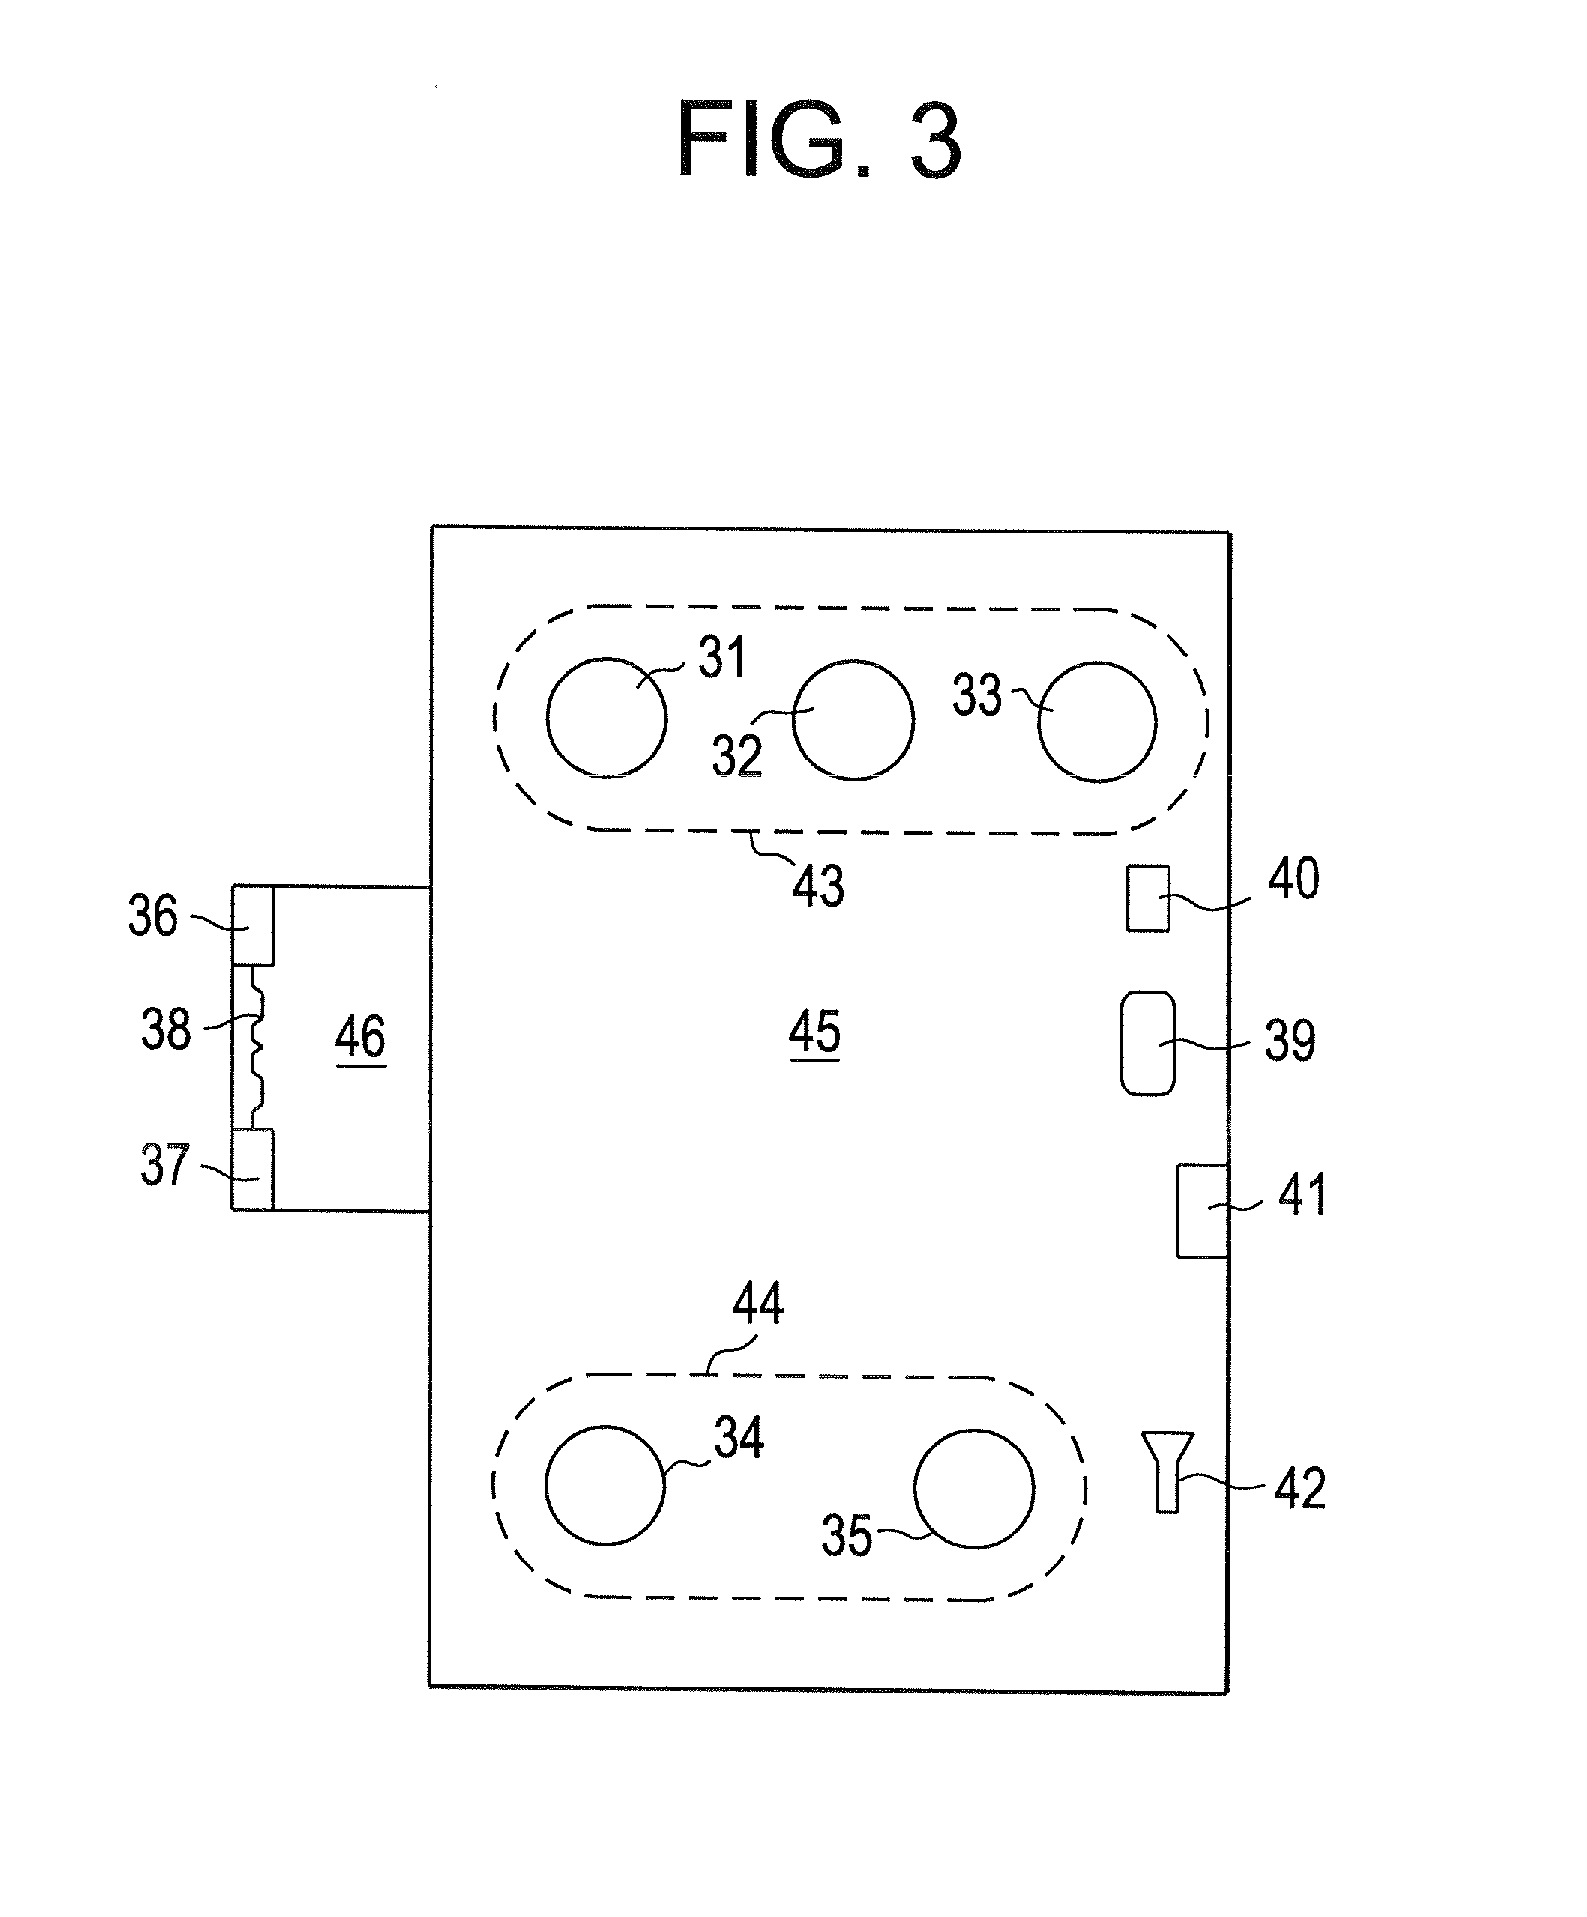 Light fixtures, systems for controlling light fixtures, and methods of controlling fixtures and methods of controlling lighting control systems